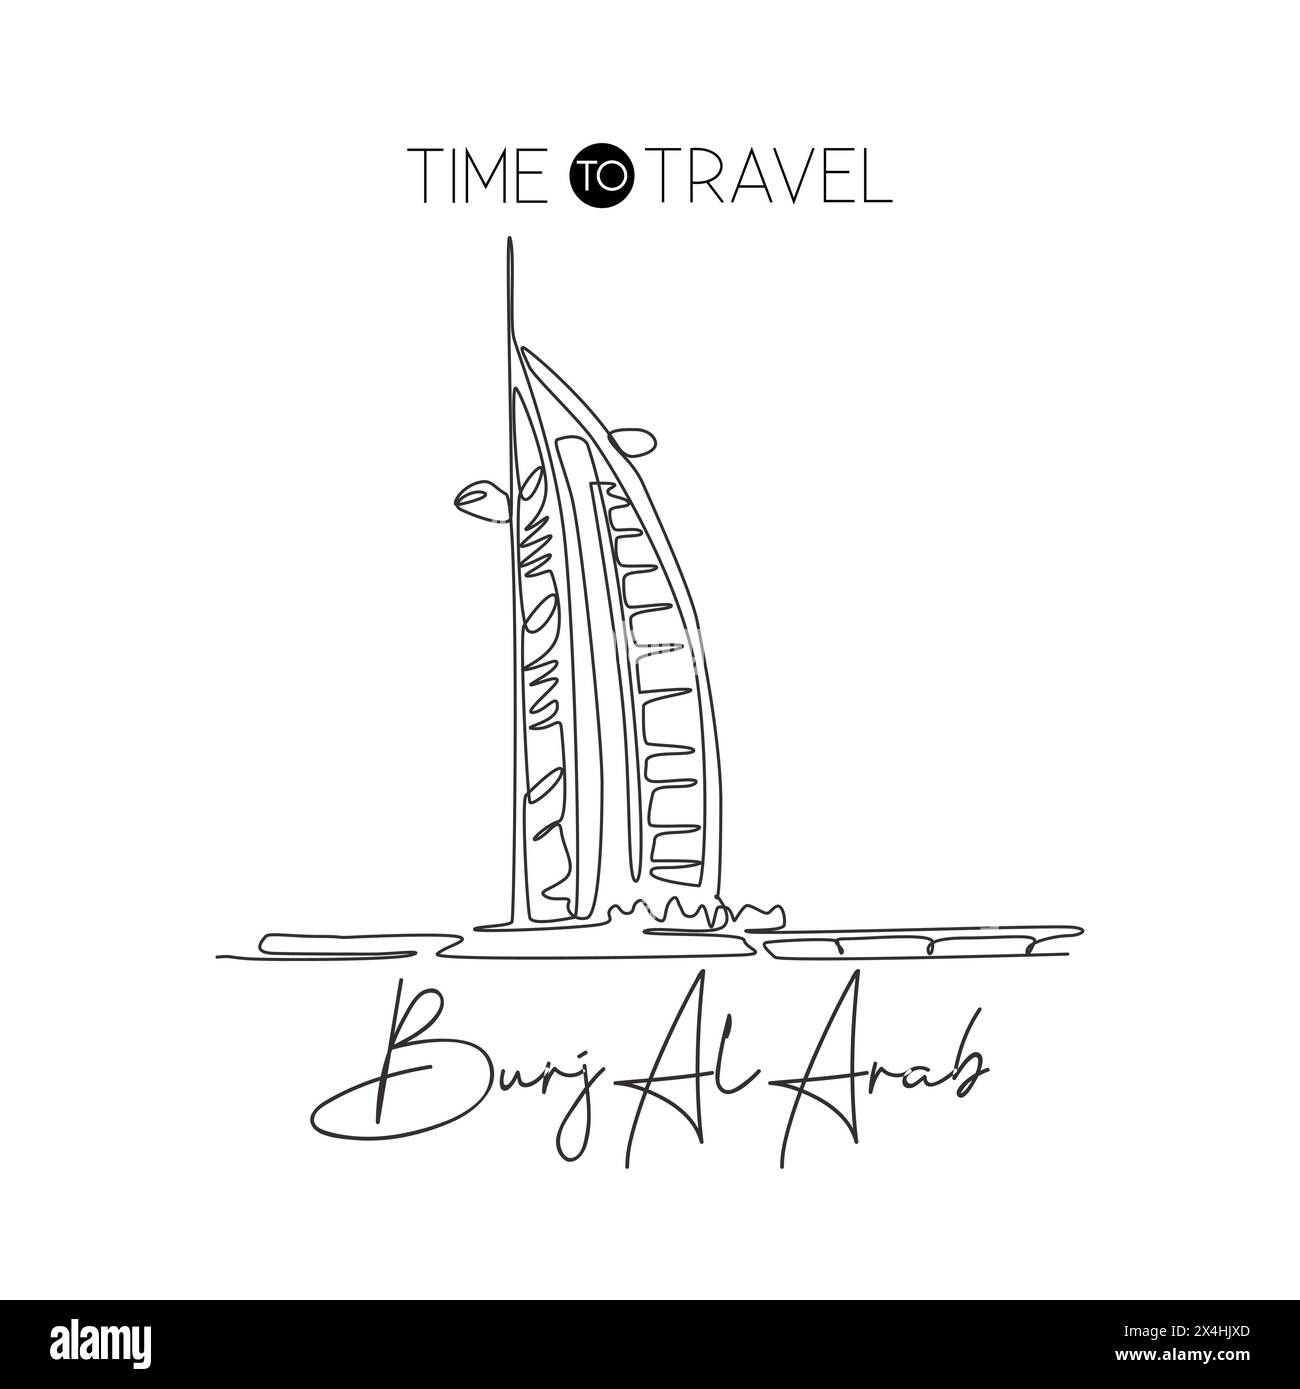 Depok, Indonesia-August 1, 2019: Single continuous line drawing of welcome to Burj Al Arab landmark. Dubai, United Arab of Emirates famous place. Home Stock Vector